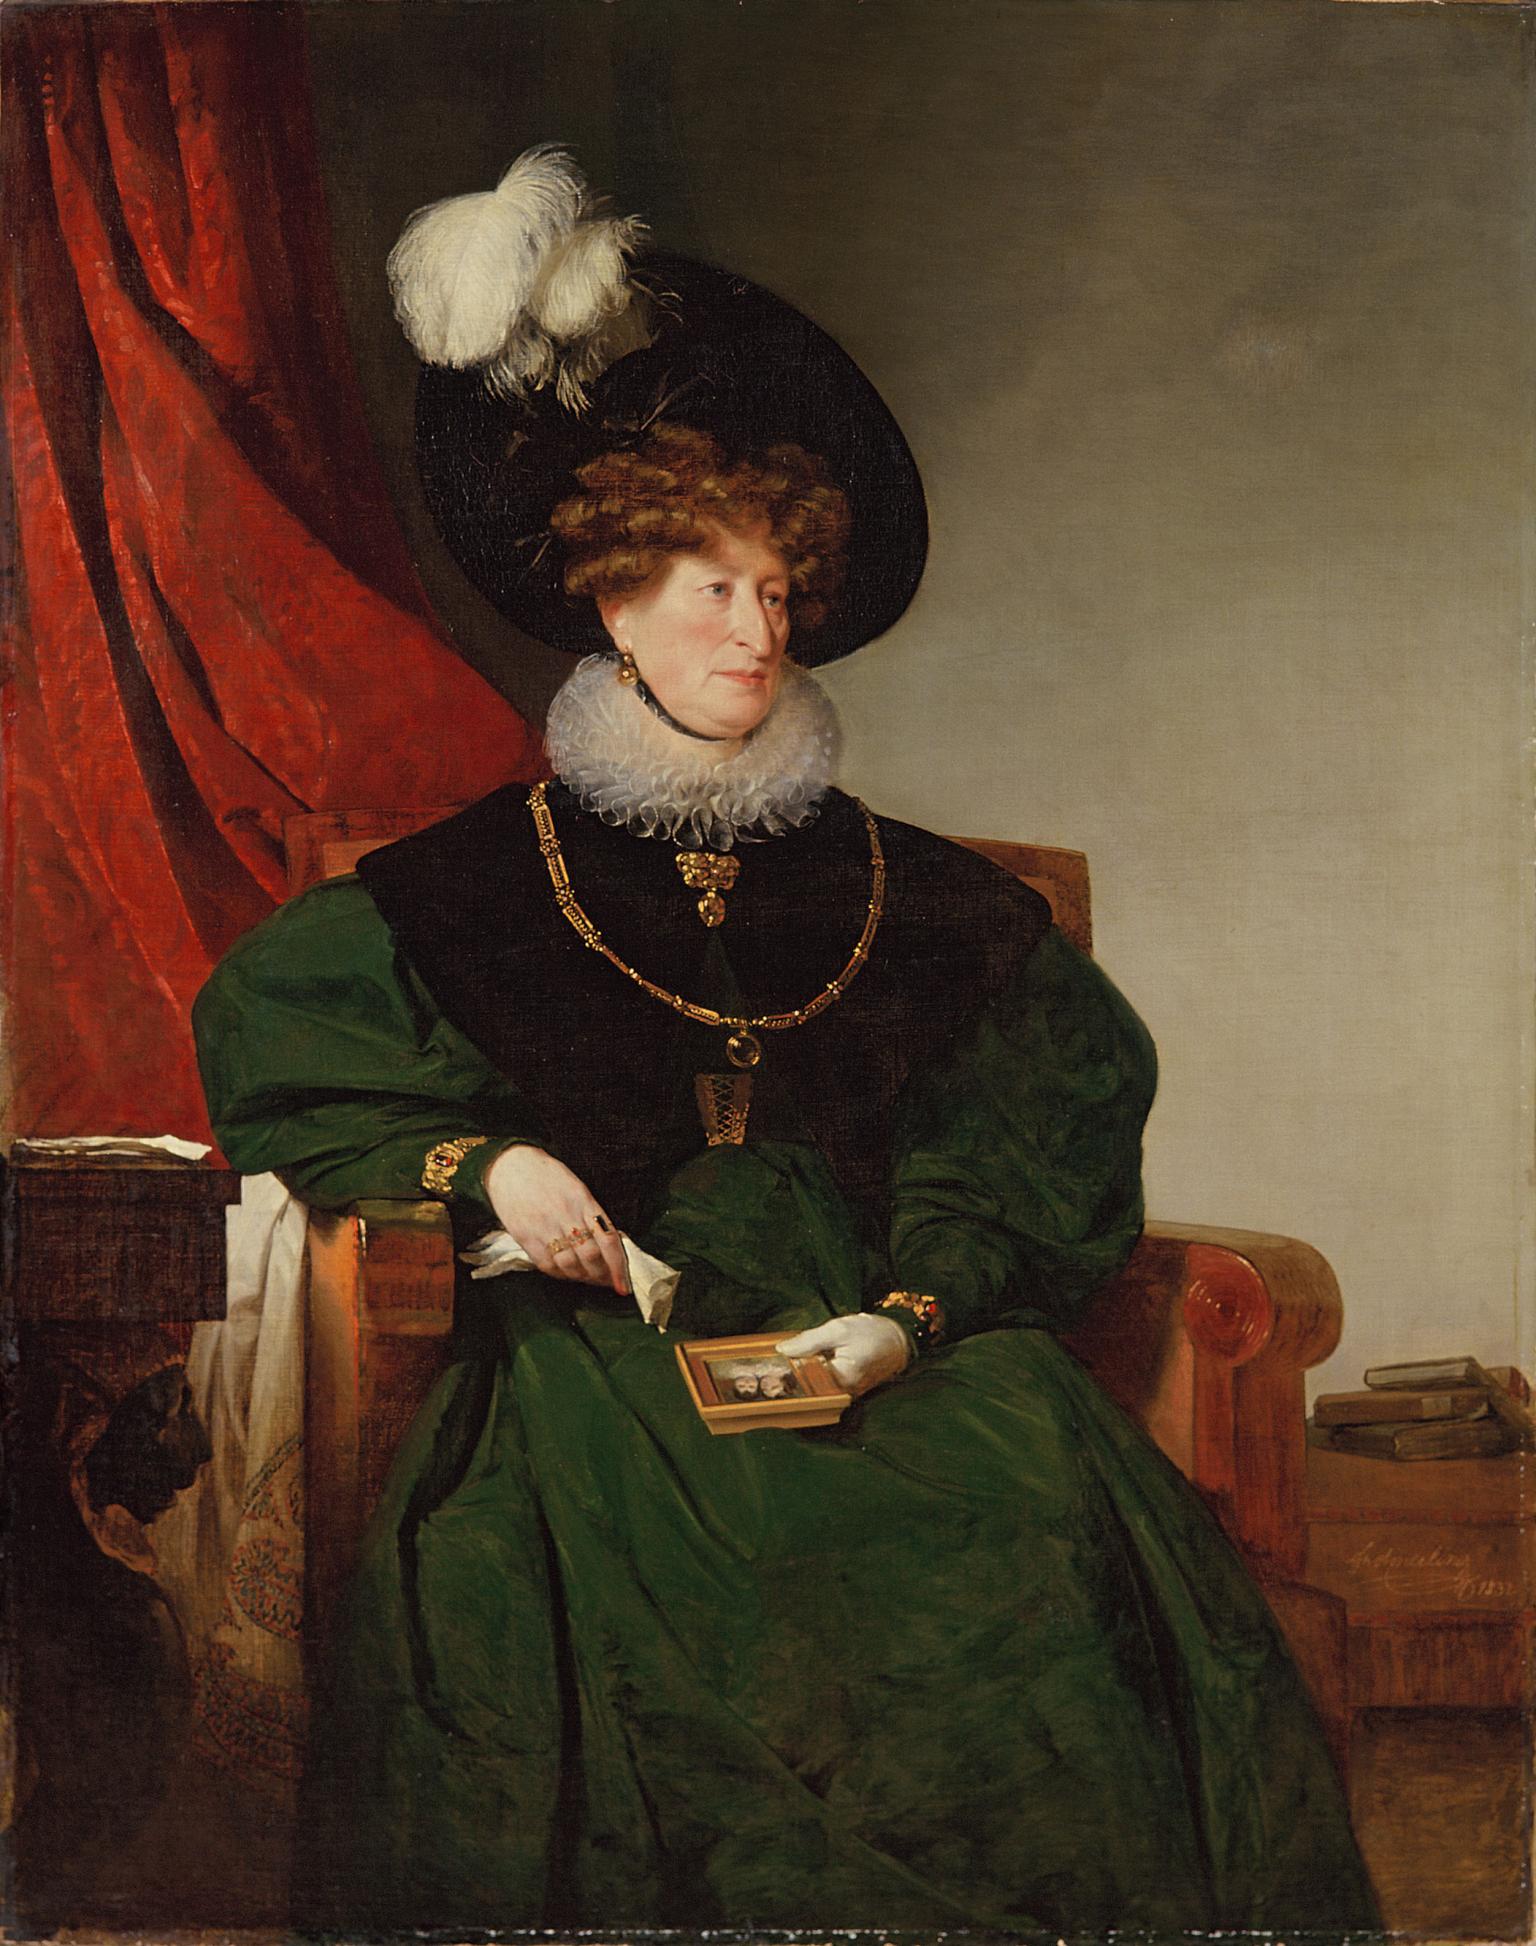 Portrait painting of seated woman wearing gold jewelry, large hat brimmed with feather, and holding a handkerchief and small portrait of two individuals in her lap.